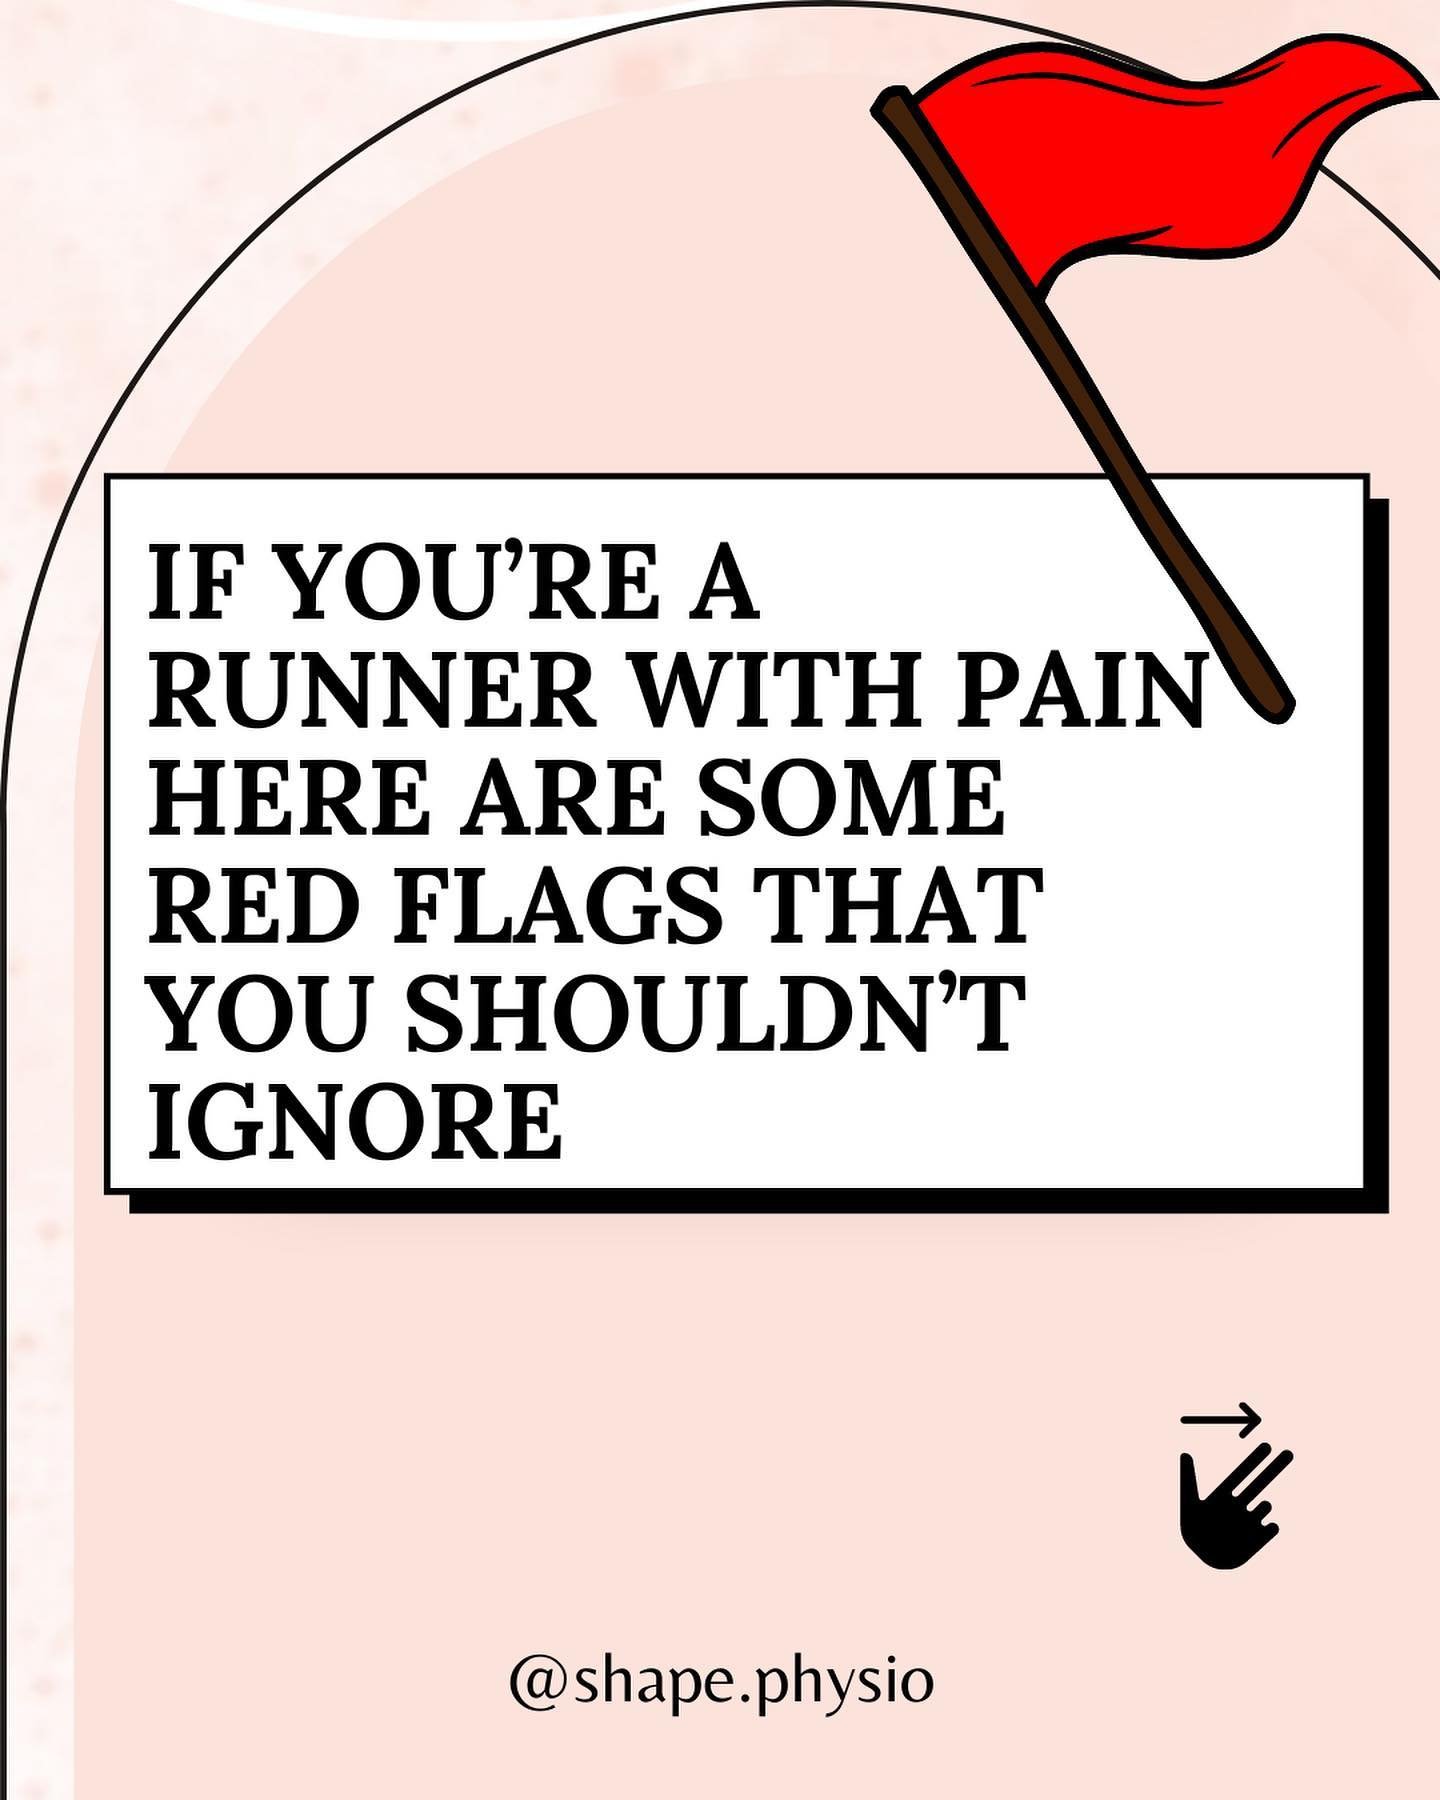 🚩 Red flags 🚩 are signs and symptoms that healthcare professionals need to look out for because they can point toward a more serious condition. 

If you&rsquo;re a runner in pain, some the examples above could warrant stopping running and getting t